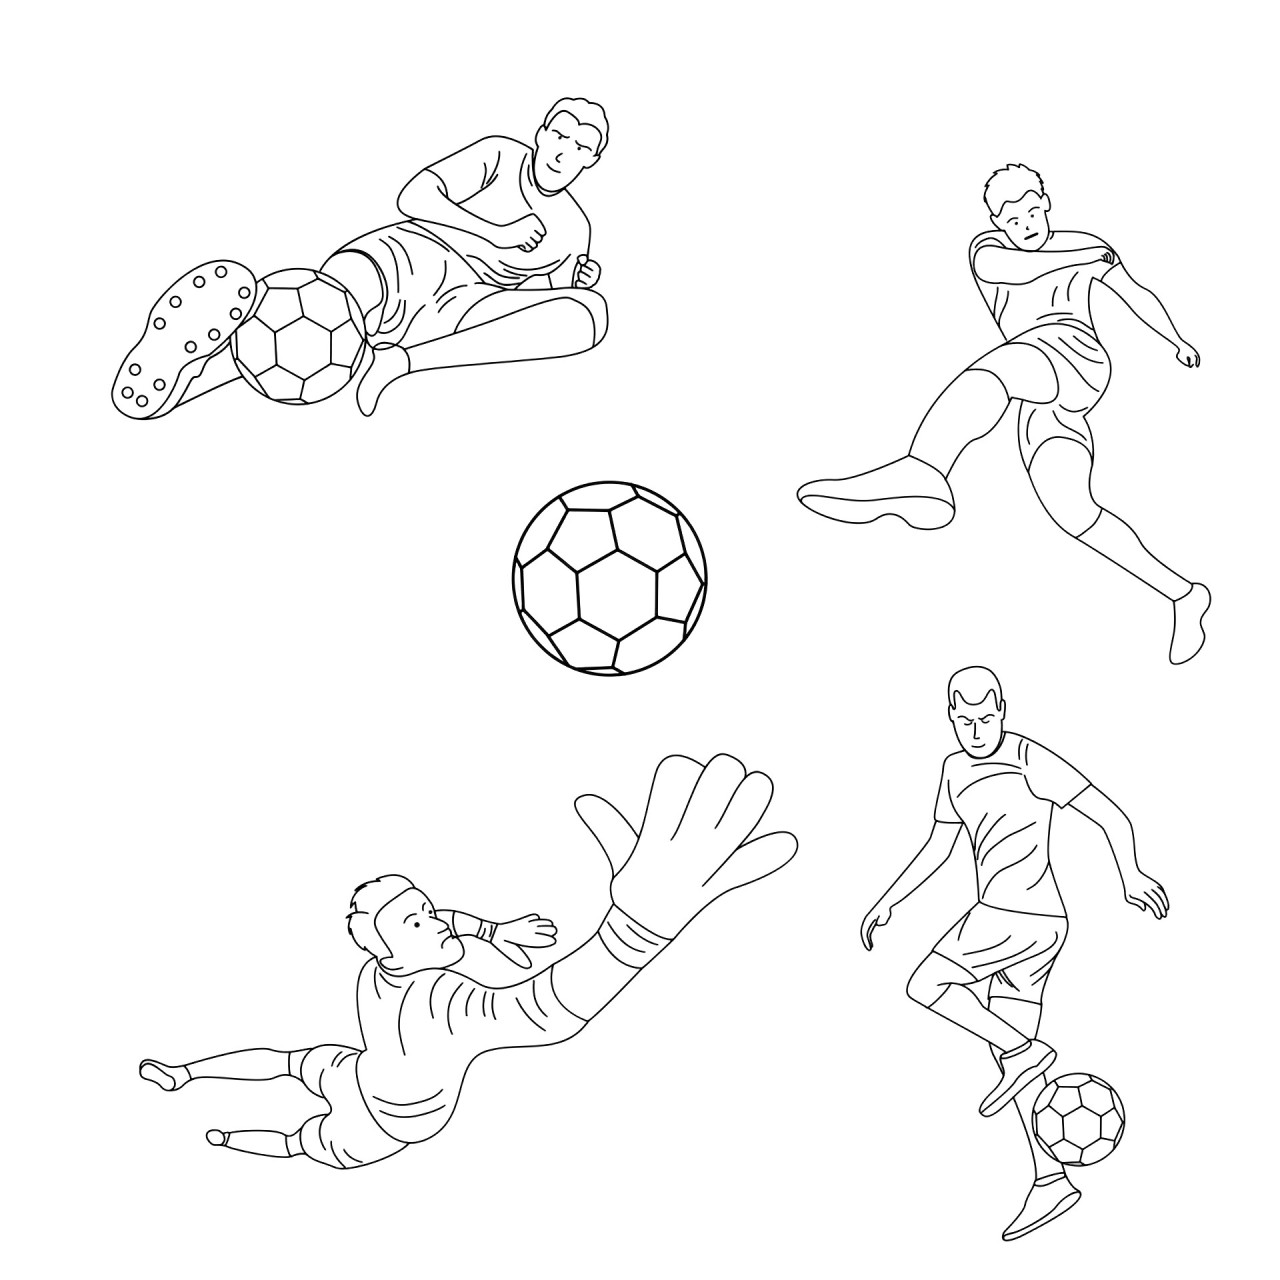 Euro 2024 Coloring Pages Free Online For Kids!